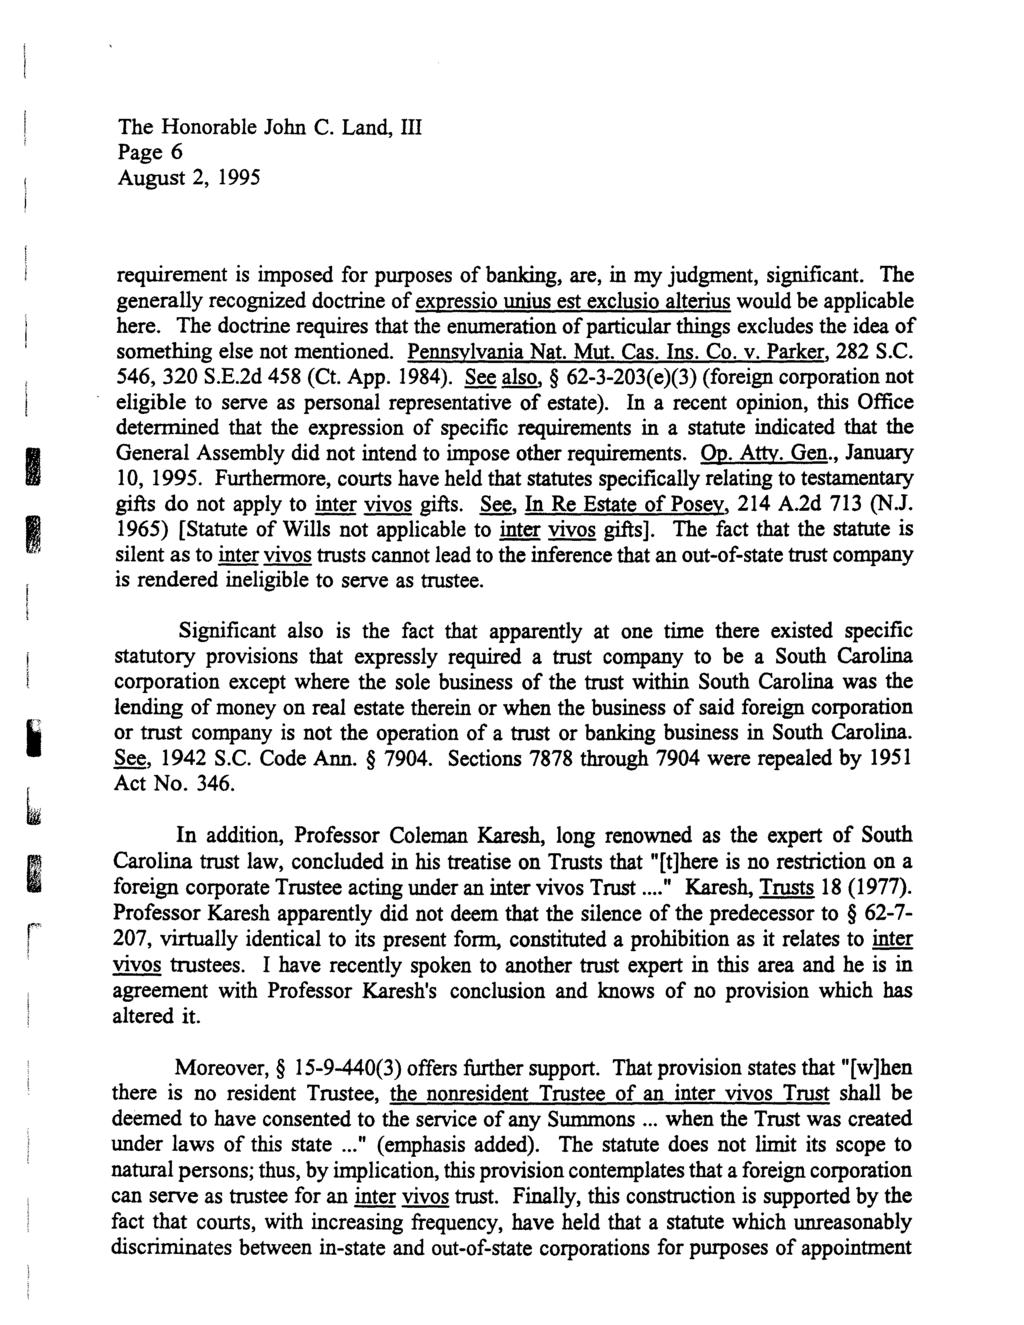 The Honorable John C. Land, Page 6 i b r! requirement is imposed for purposes of banking, are, in my judgment, significant.